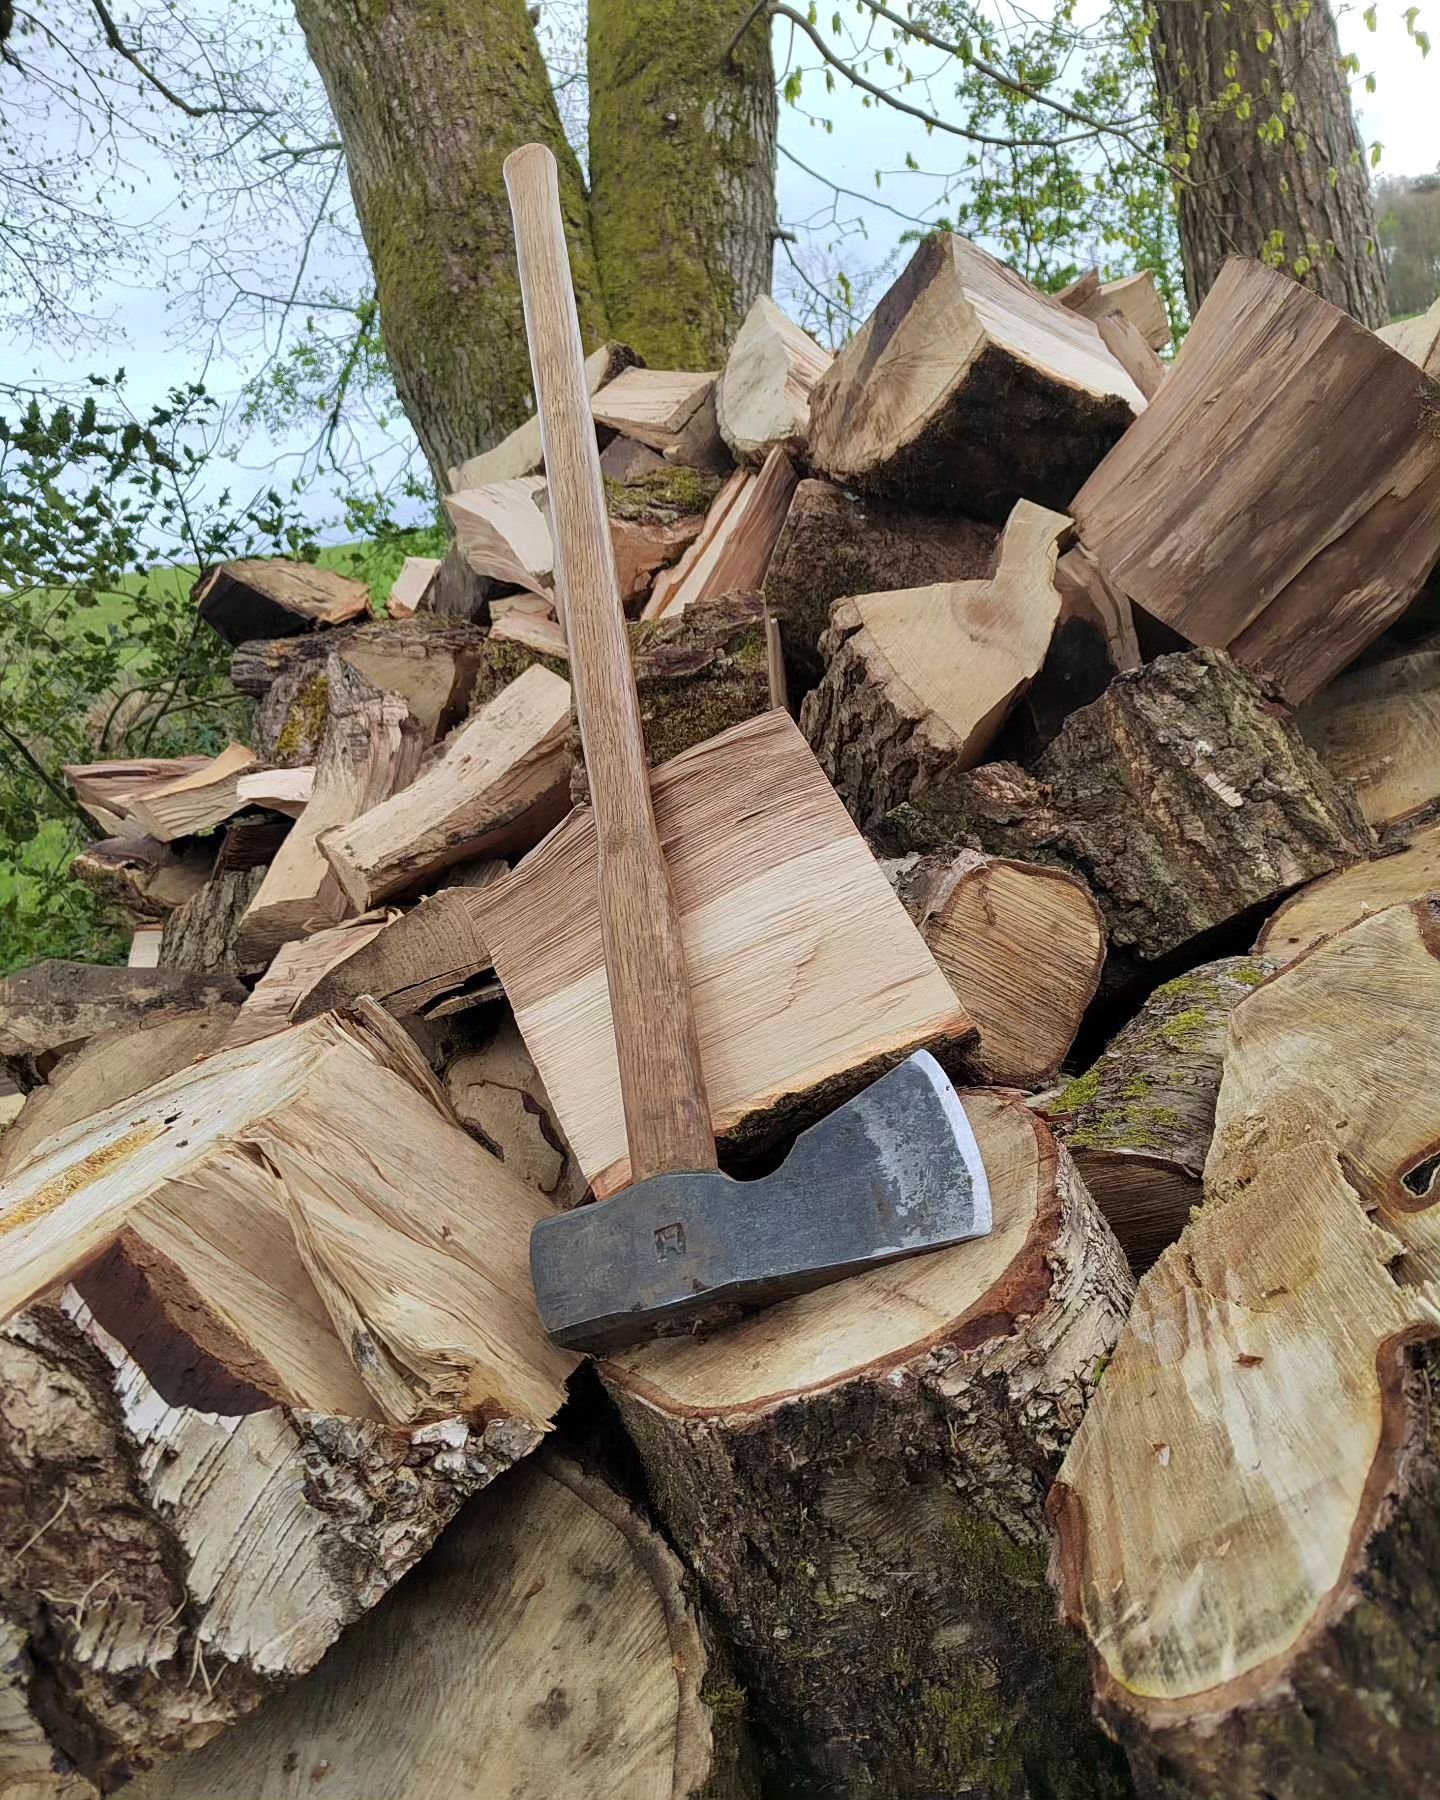 Been giving the prototype splitting maul a good workout today - weighing in at 8lbs it is forged from  En9 steel, hardened and tempered and hung on a 36 inch hickory sledge handle.
It has performed beautifully on these large rounds - a mixture of oak